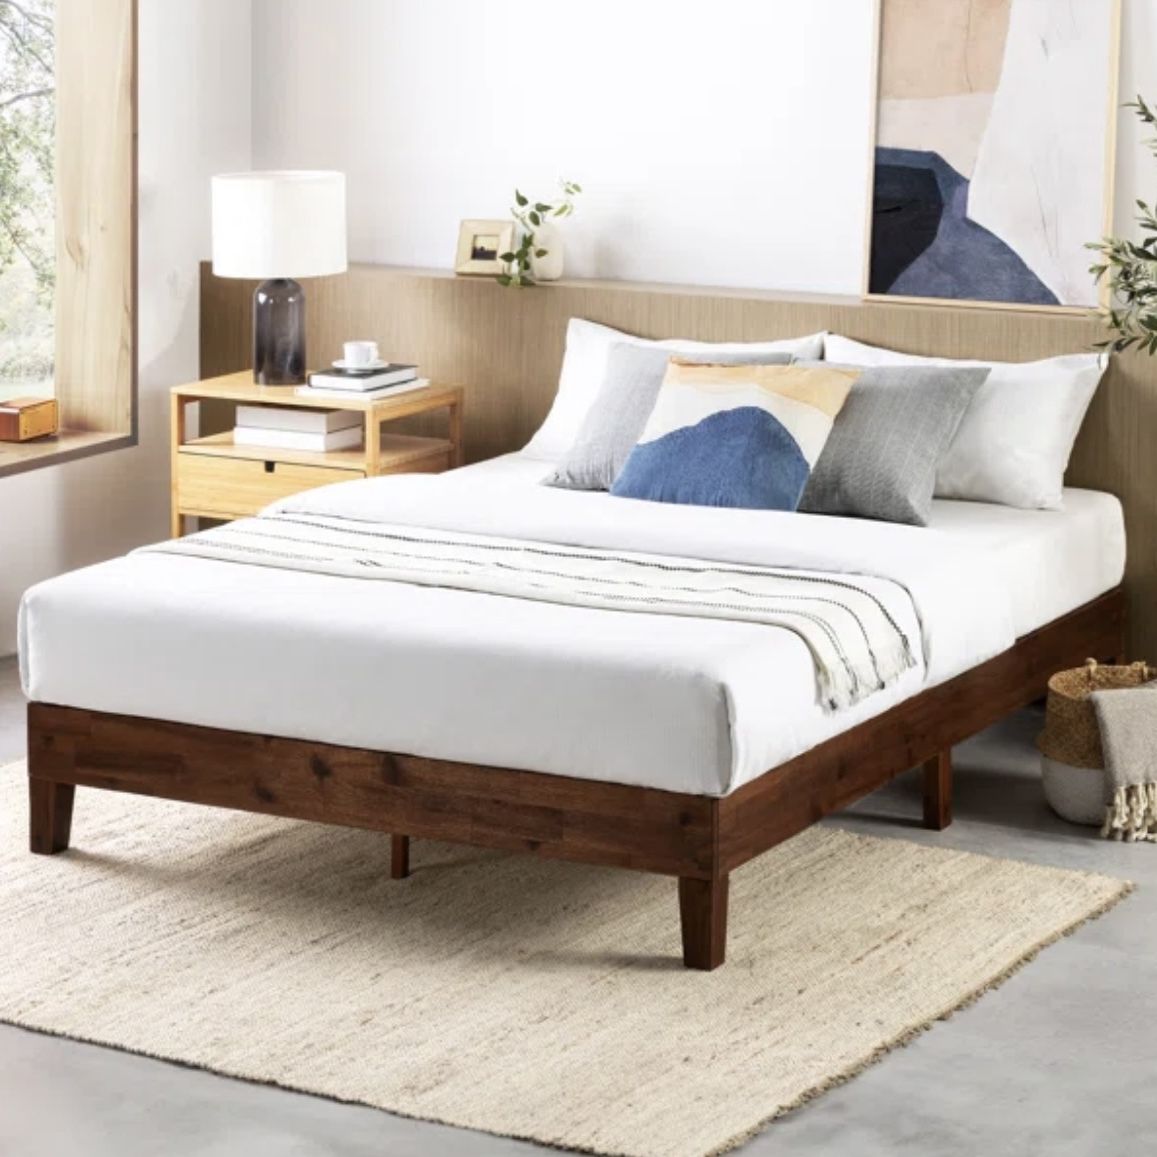 Queen Size Bed Frame With Mattress